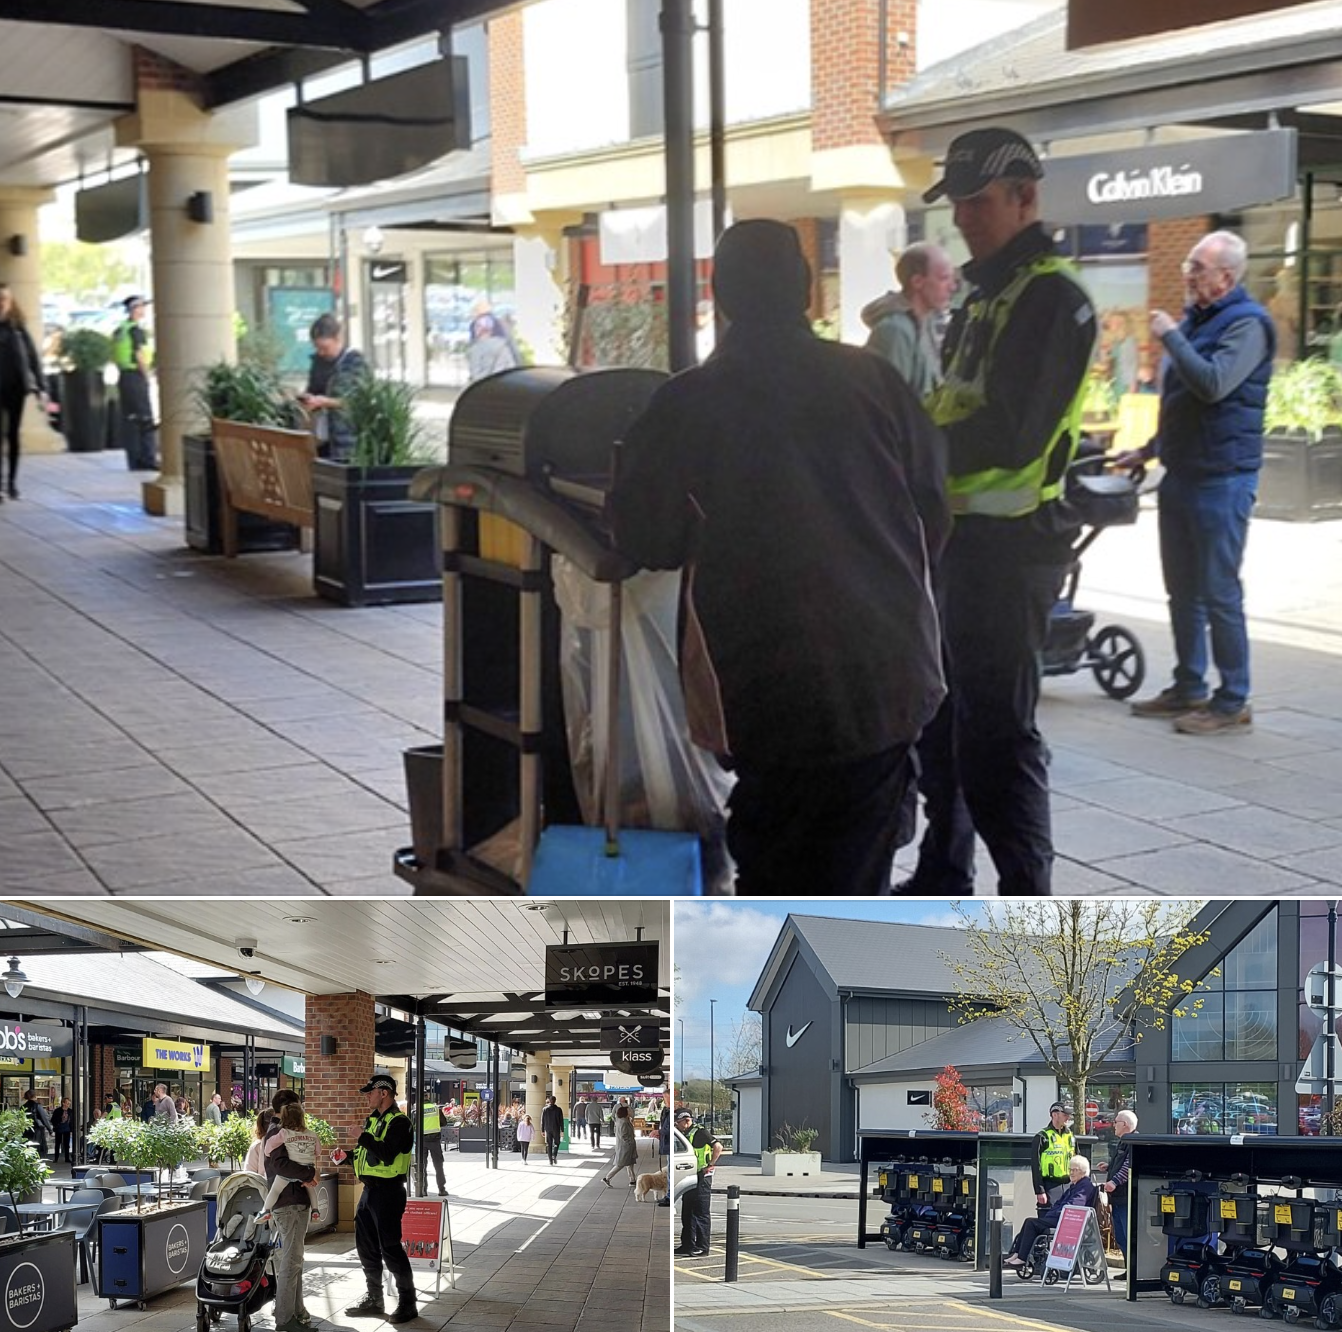 Police engage with shoppers and businesses